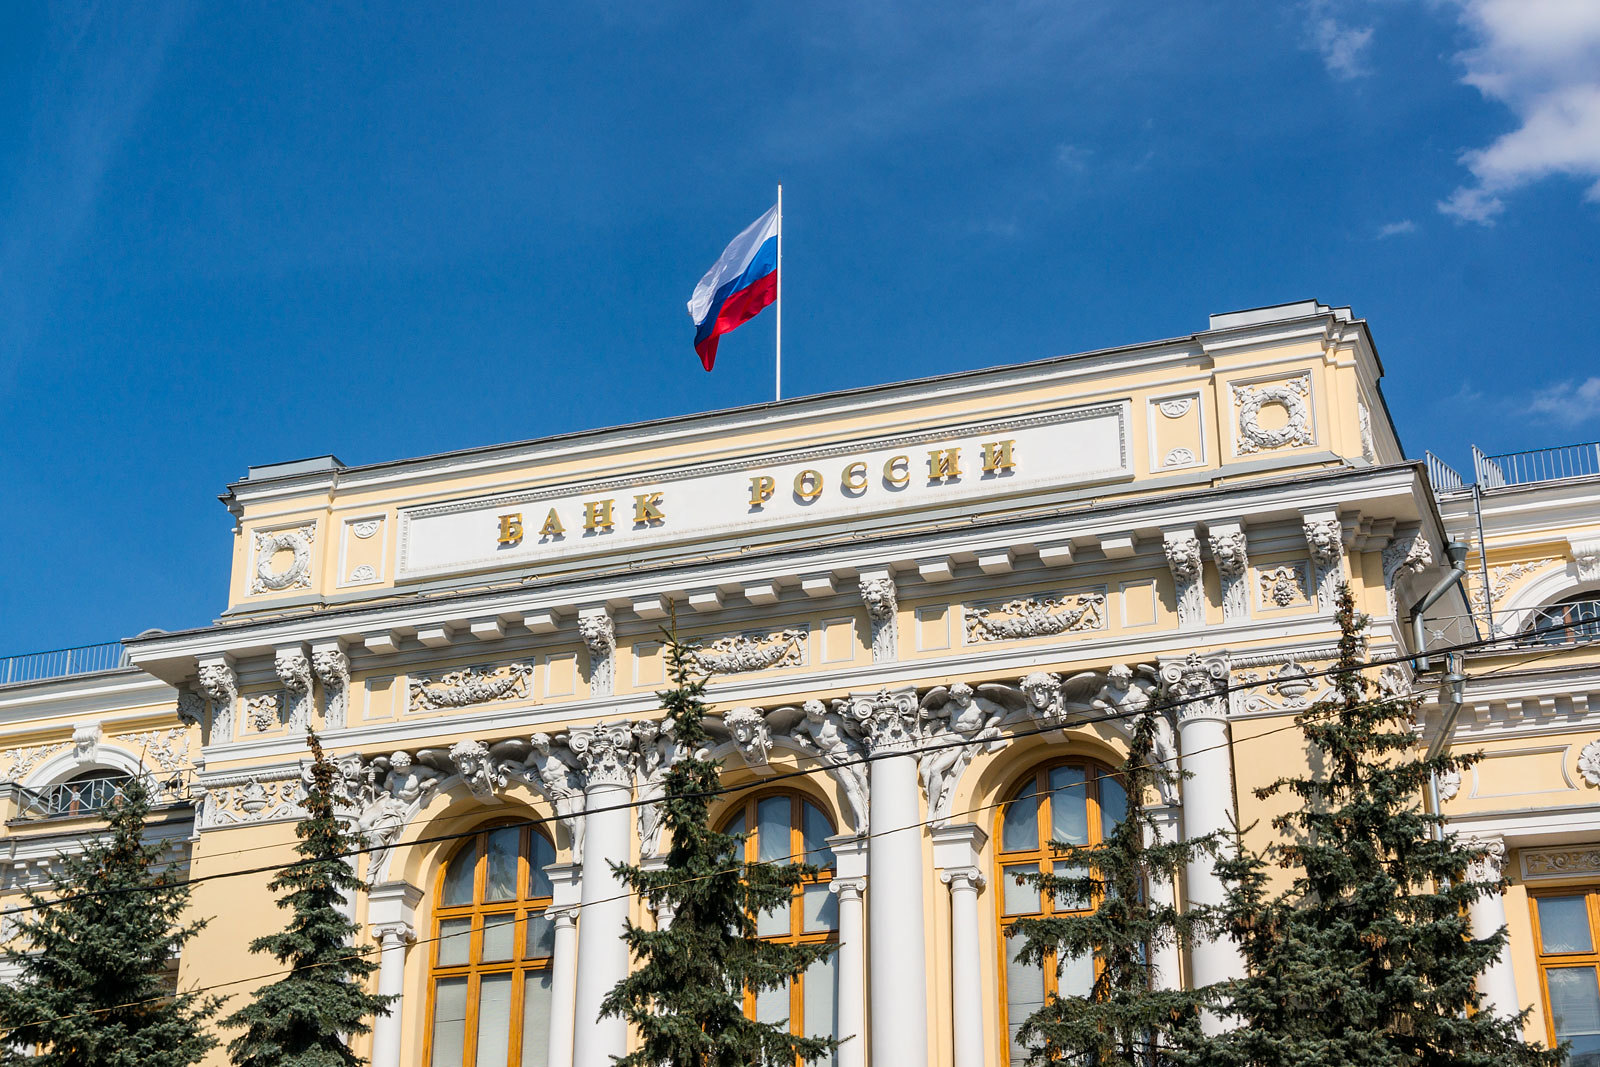 Russian central bank headquarters in Moscow. © Moscow-Live via Flickr